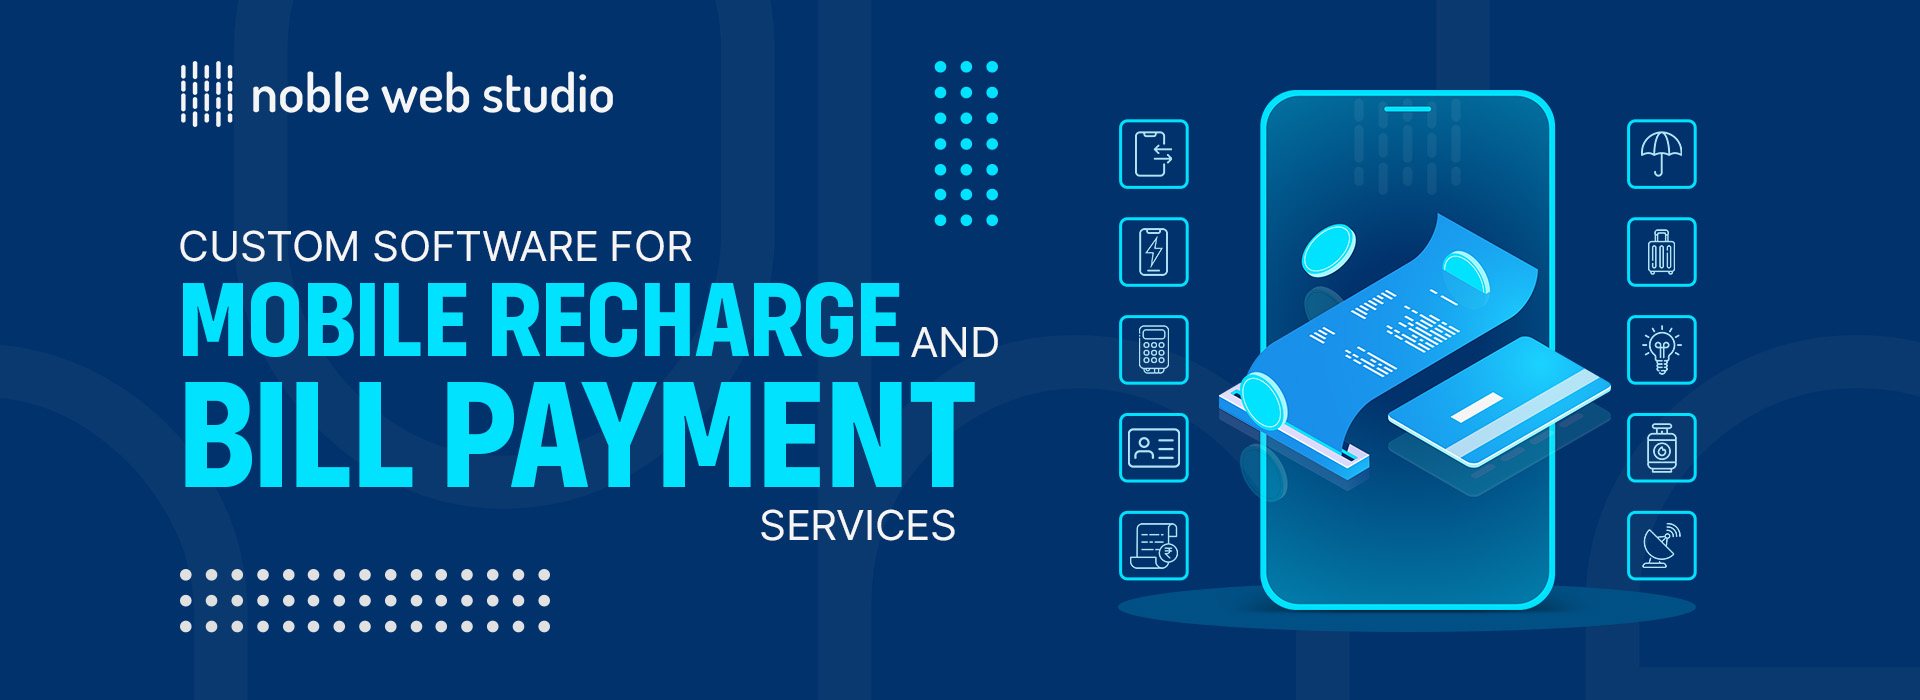 Custom Software for Mobile Recharge and Bill Payment Services